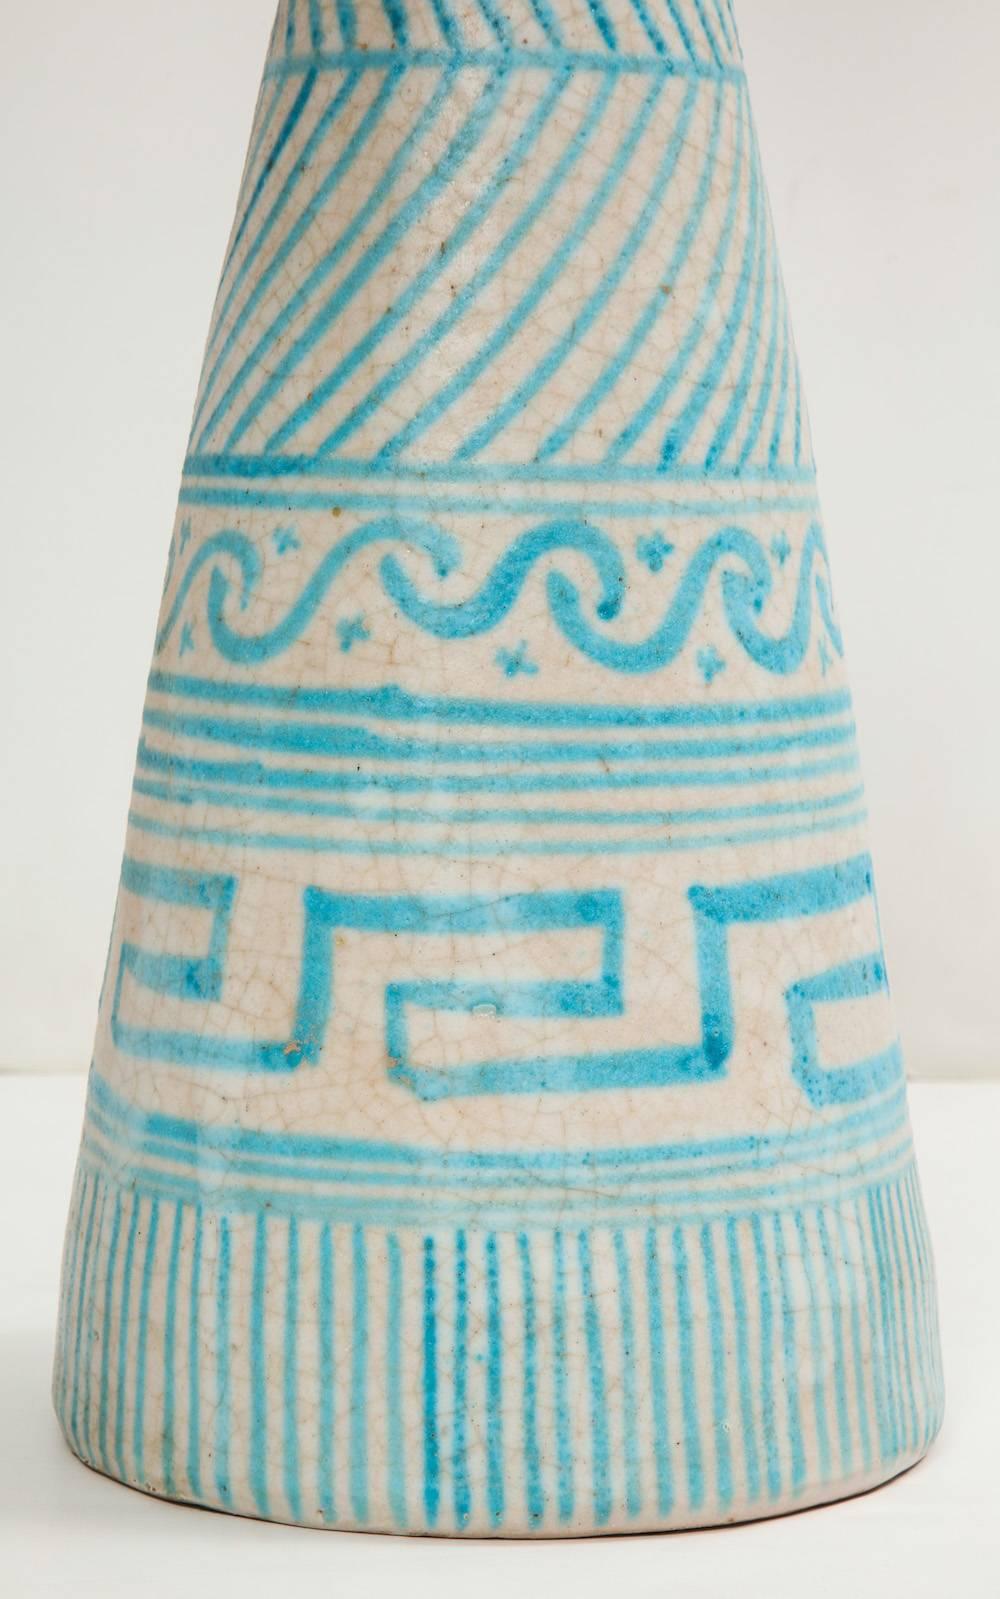 Ceramic cone lamp by C.A.S. Vietri.
Studio-built earthenware base with painted classic motif patterns in whites and turquoise. Signed on underside.
Lamp base diameter 7